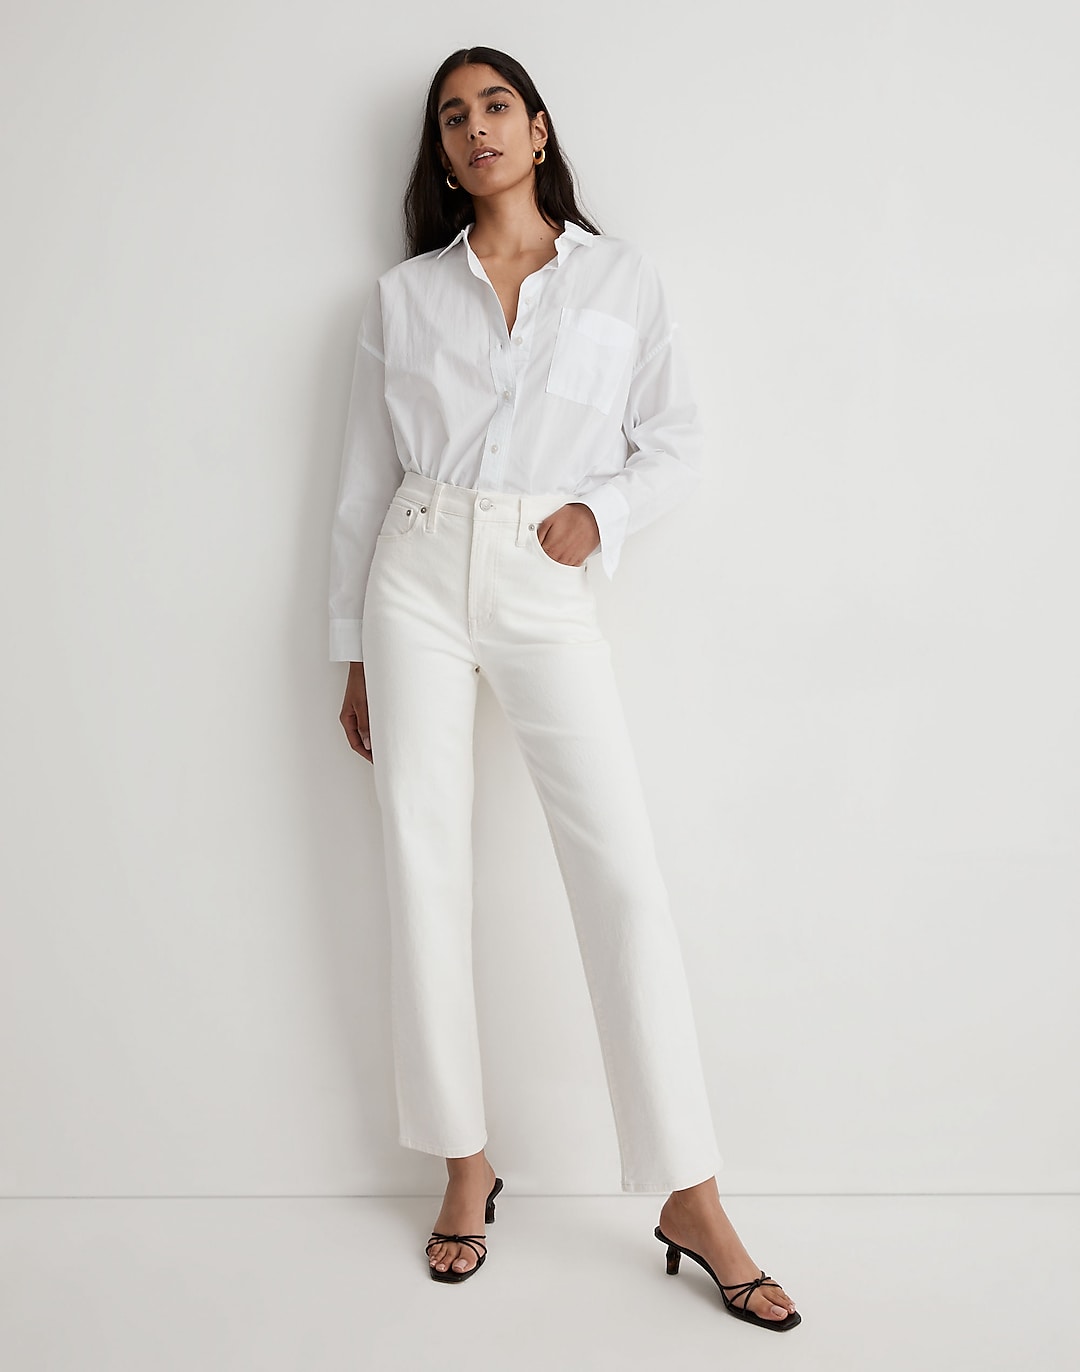 The Petite Perfect Vintage Straight Jean in Tile White | Madewell